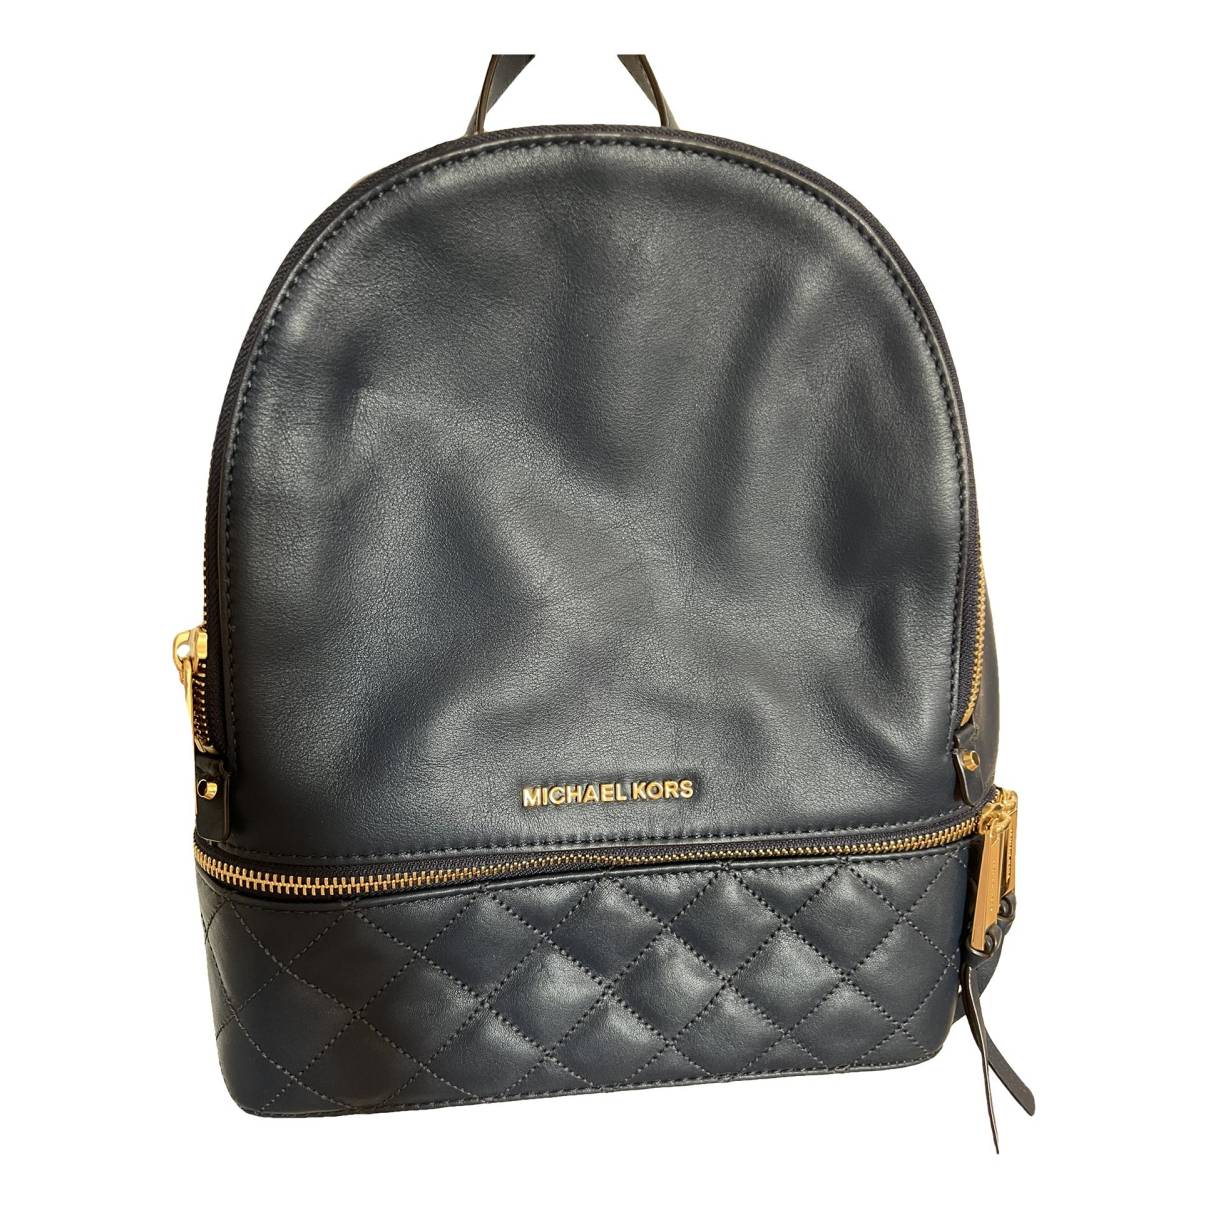 Rhea leather backpack Michael Kors Blue in Leather - 34667619